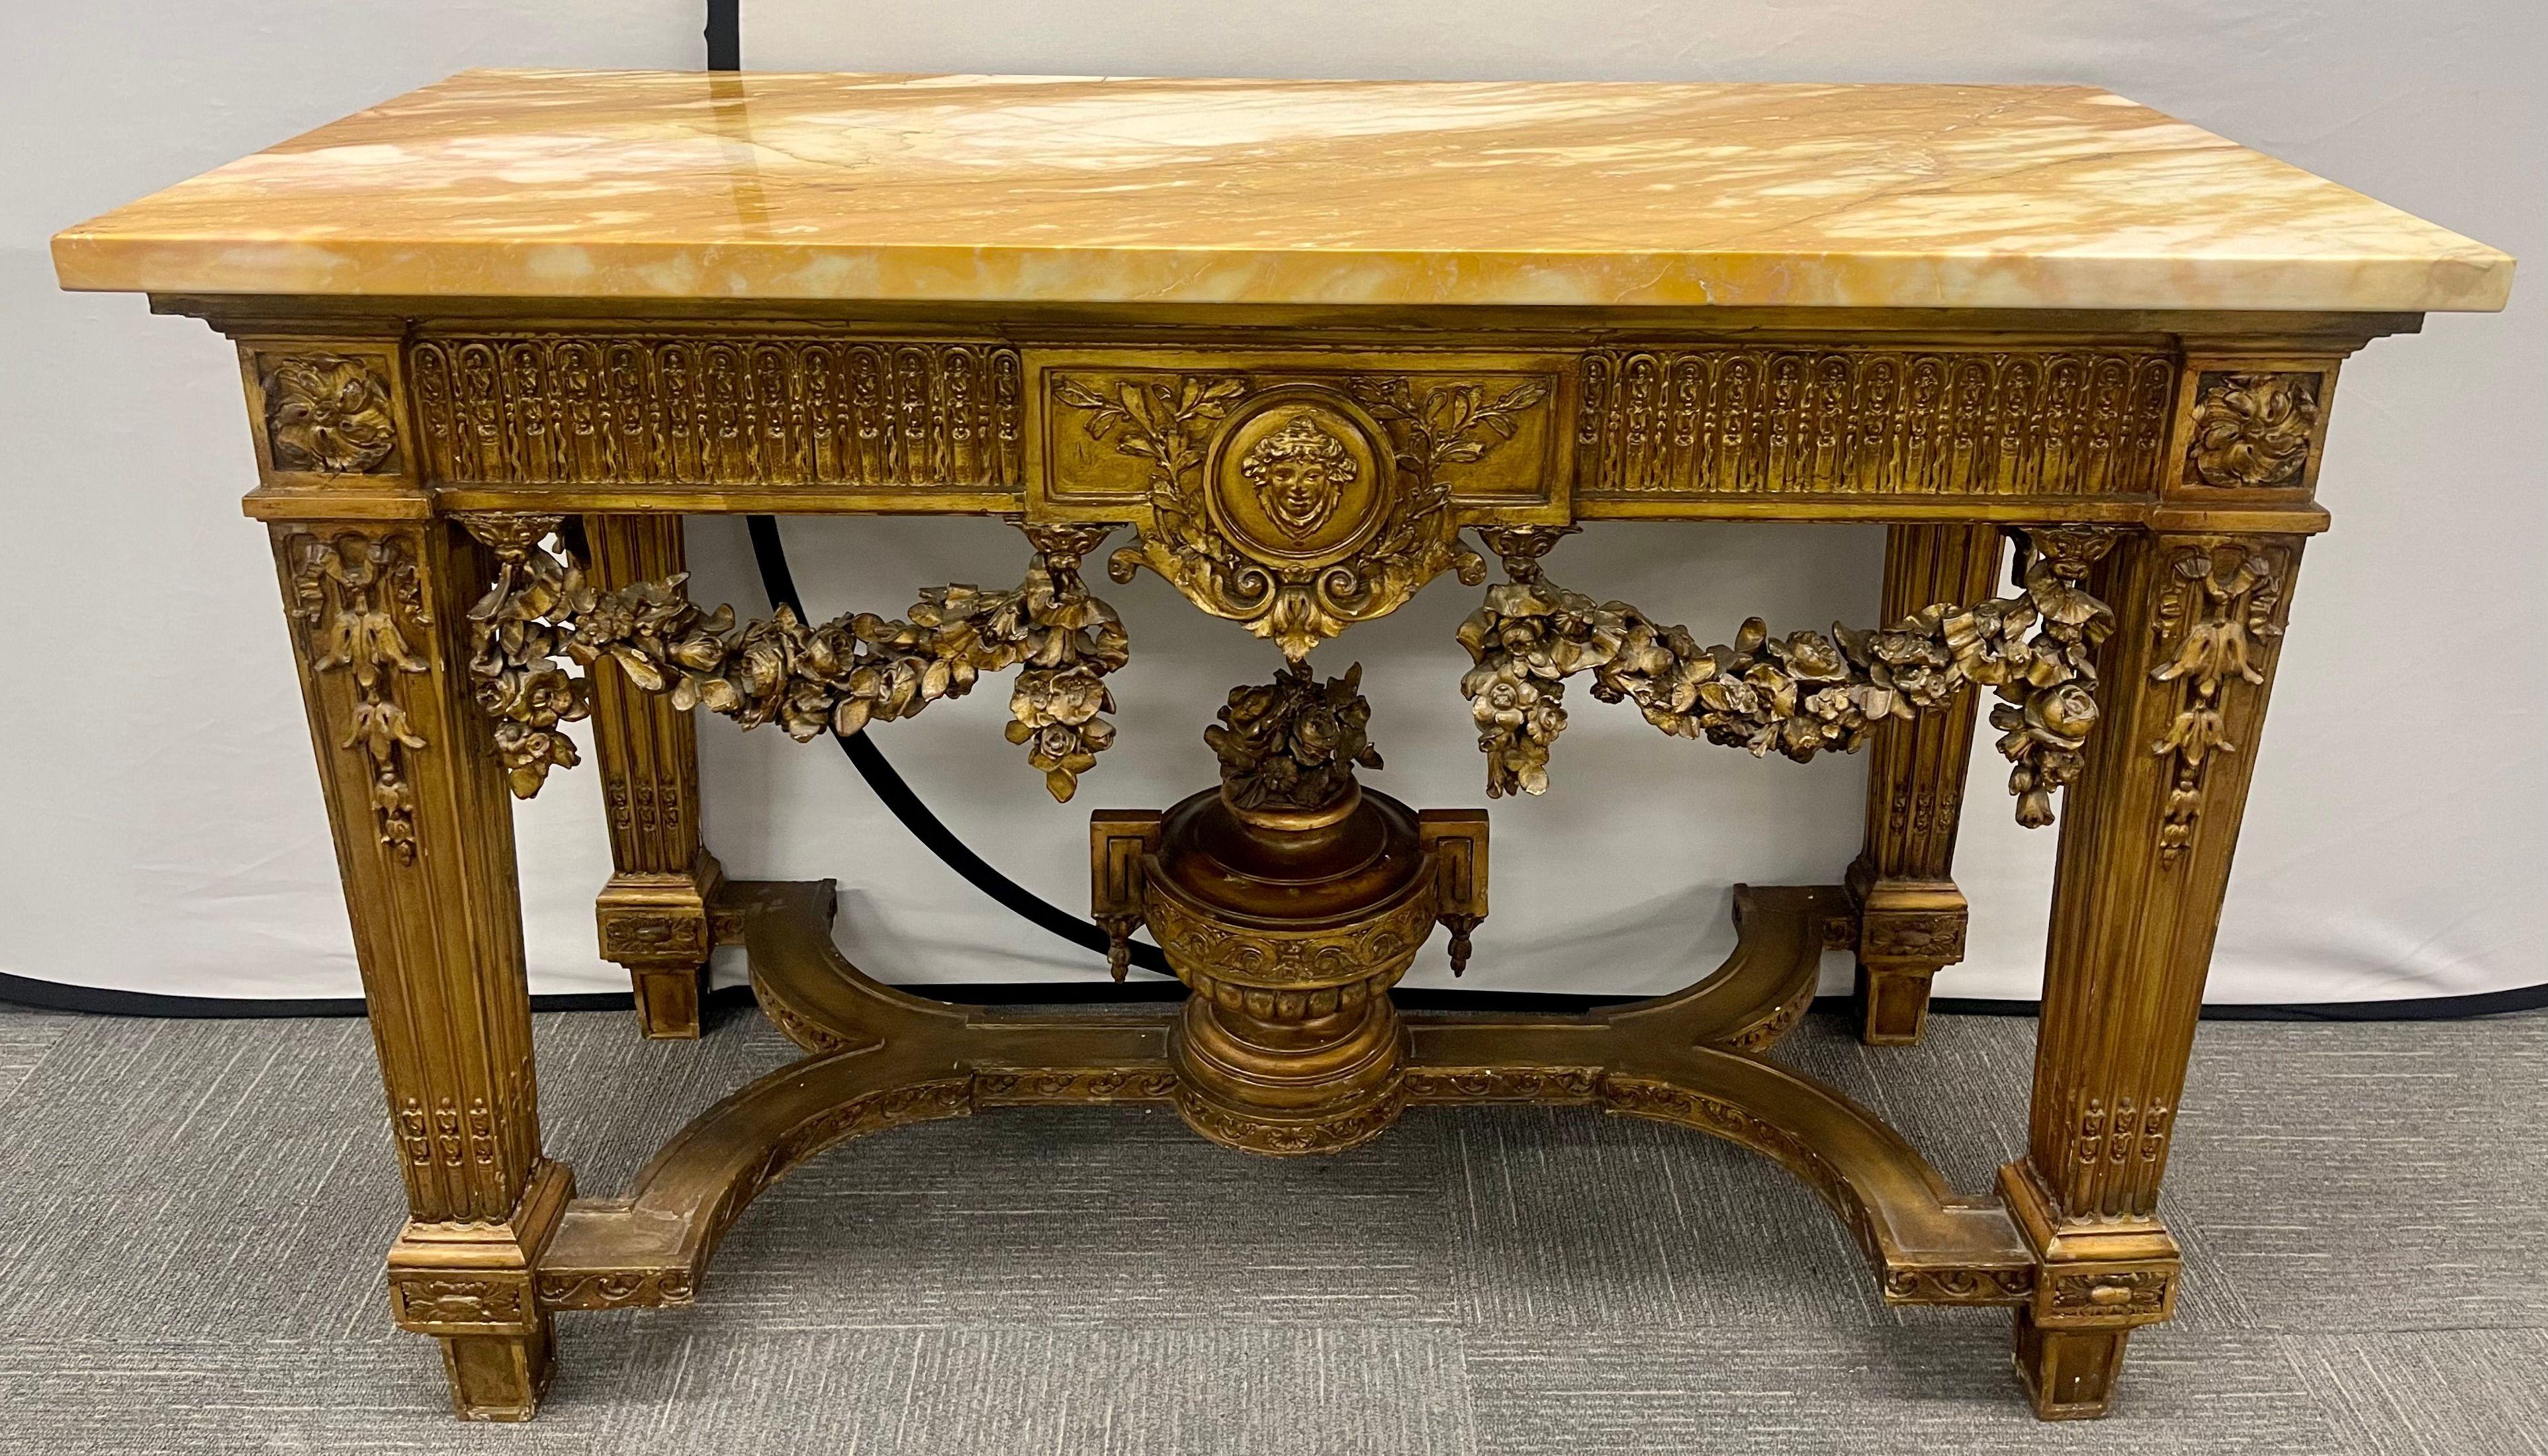 A fine turn of the century Louis XV style giltwood marble-top console table with urn form undercarriage. This fine intricately carved console table depicts the era of grandiose living at its peak. In a gilt worn finish having carved swags of roses